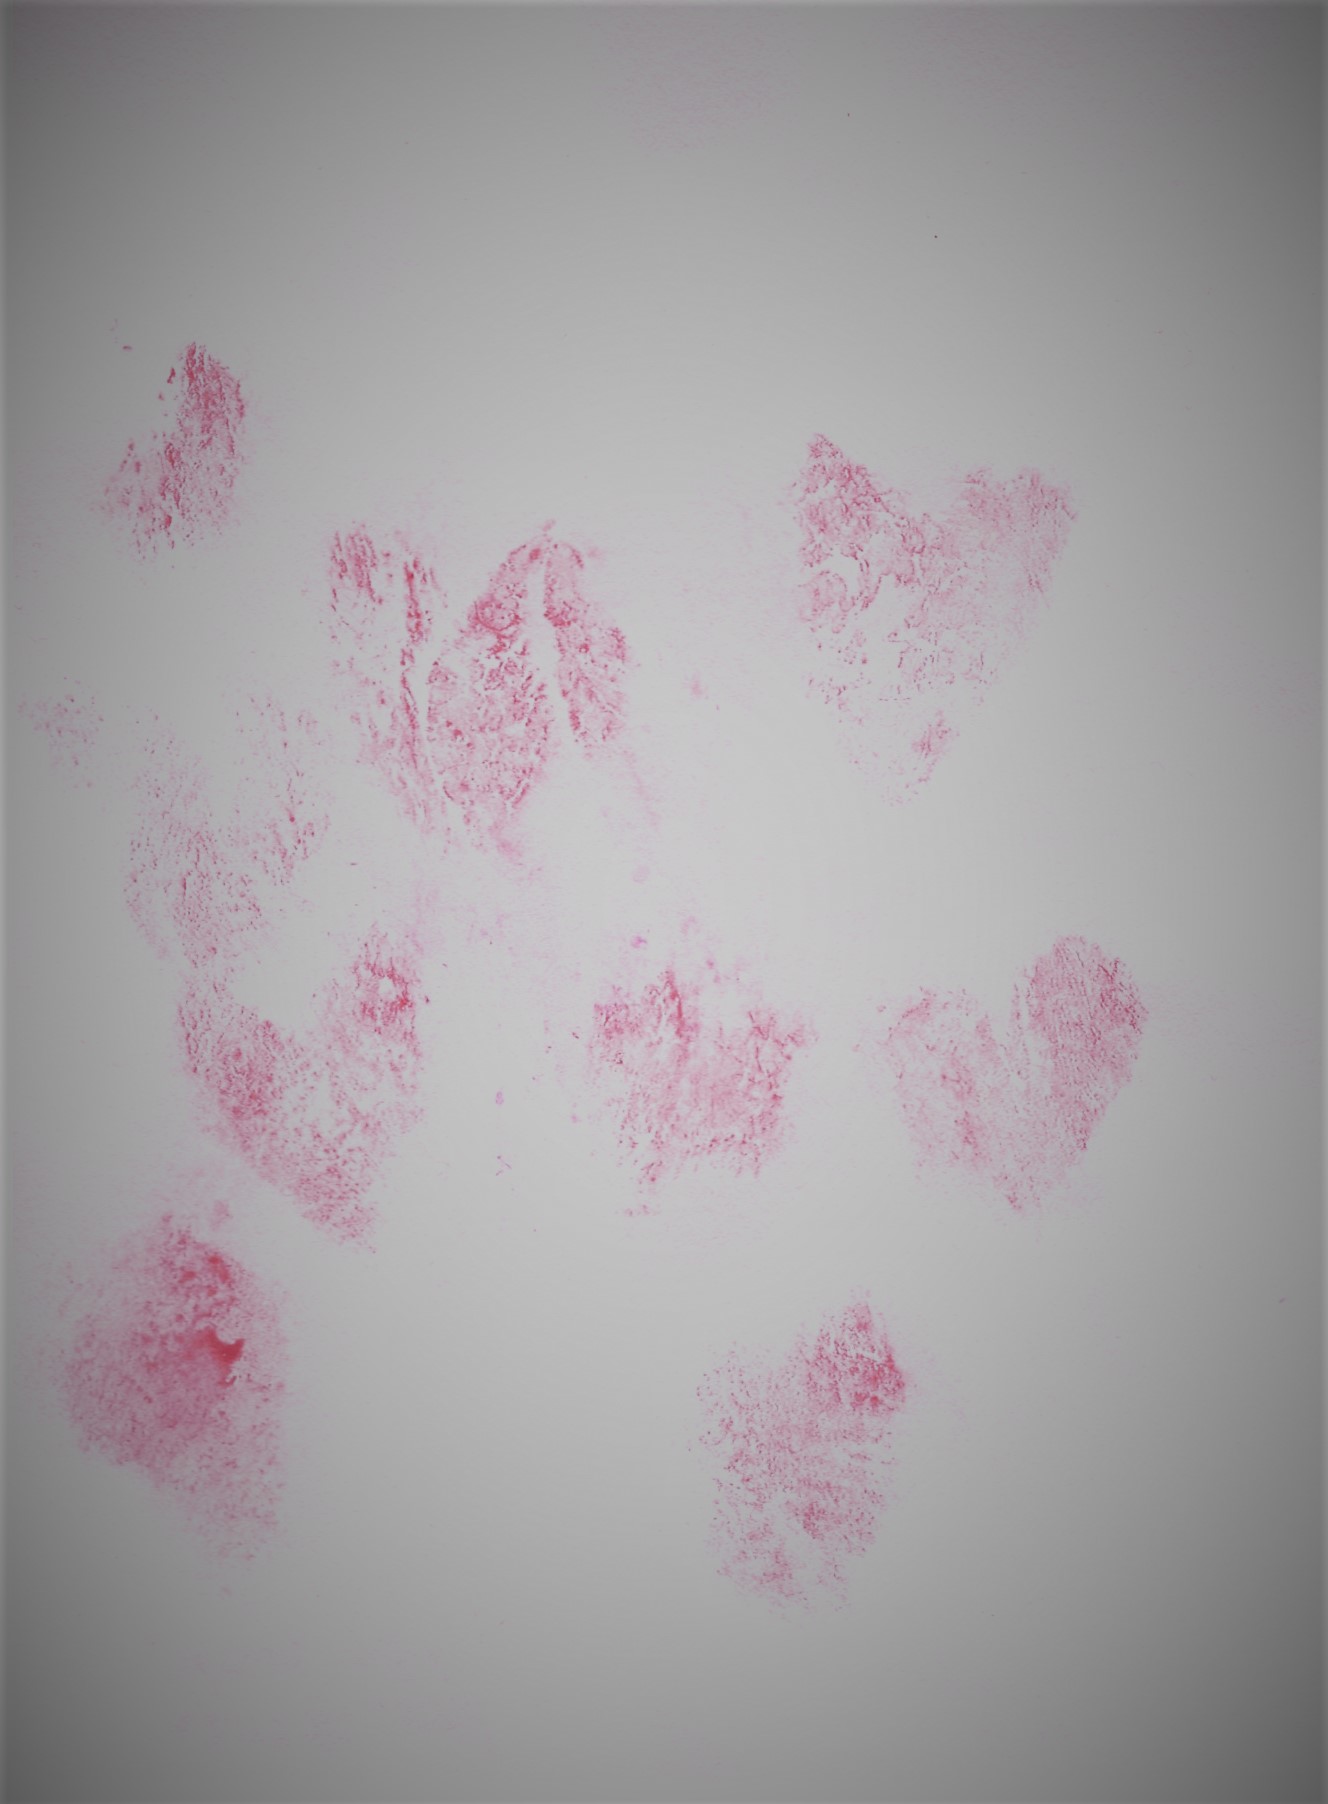 print made from pink hearts painted on and around the labia